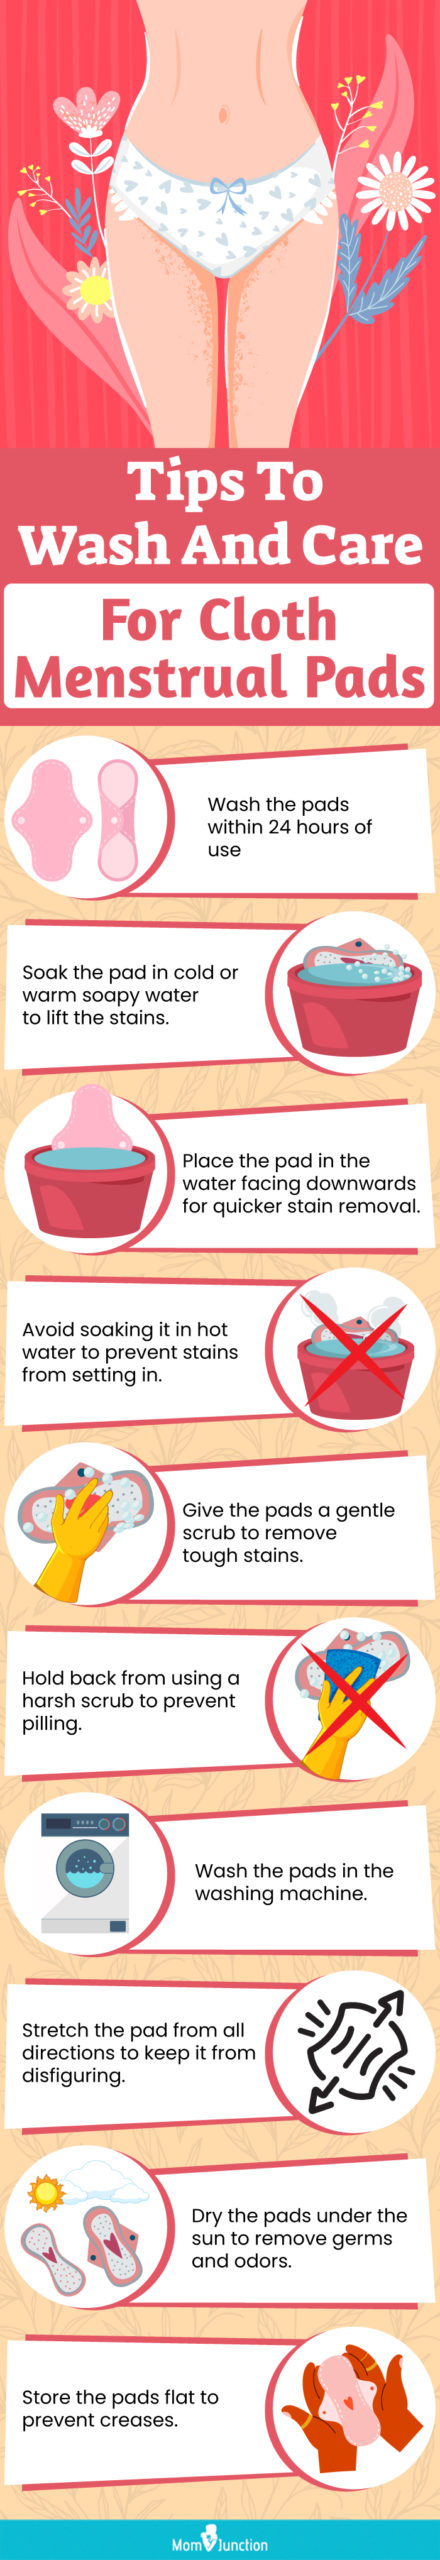 Tips To Wash And Care For Cloth Menstrual Pads (infographic)